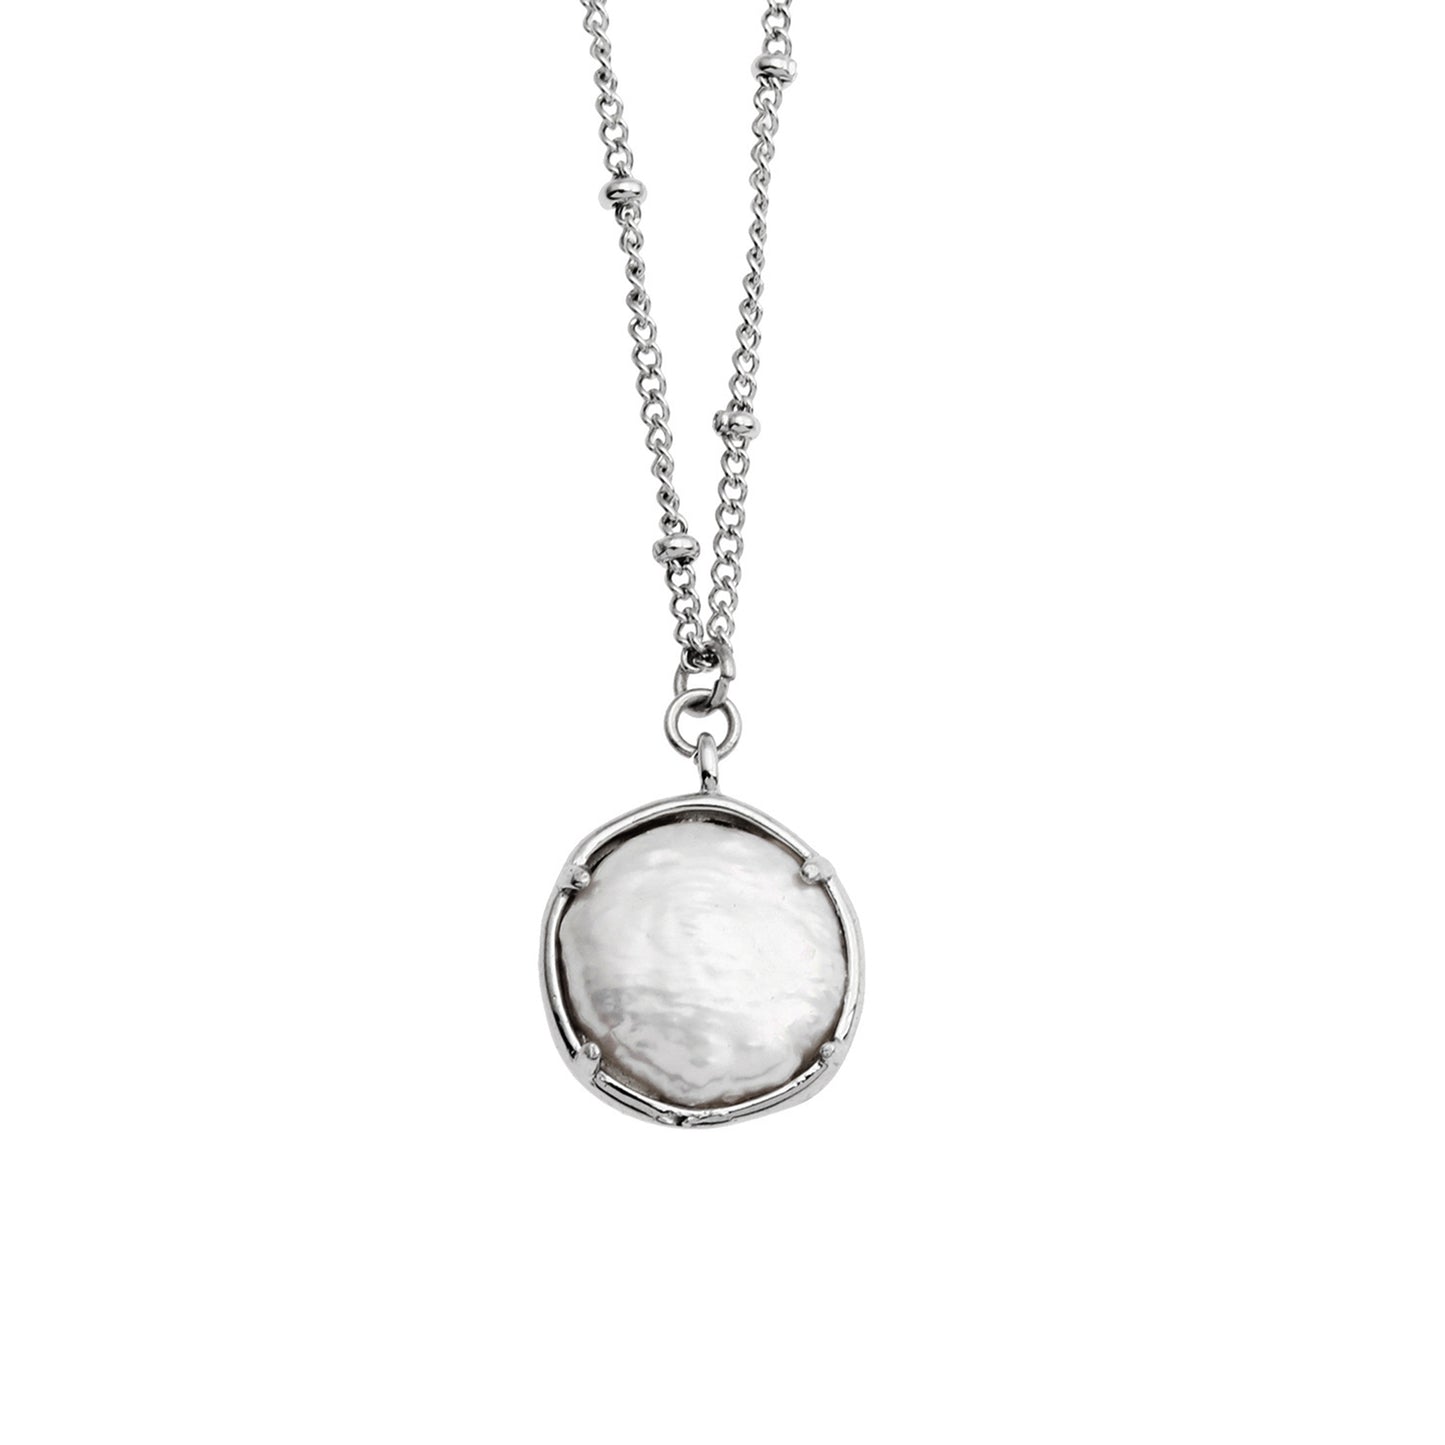 LERATI Beaded Chain with an Encased Fresh Water Pearl Pendant in Silver